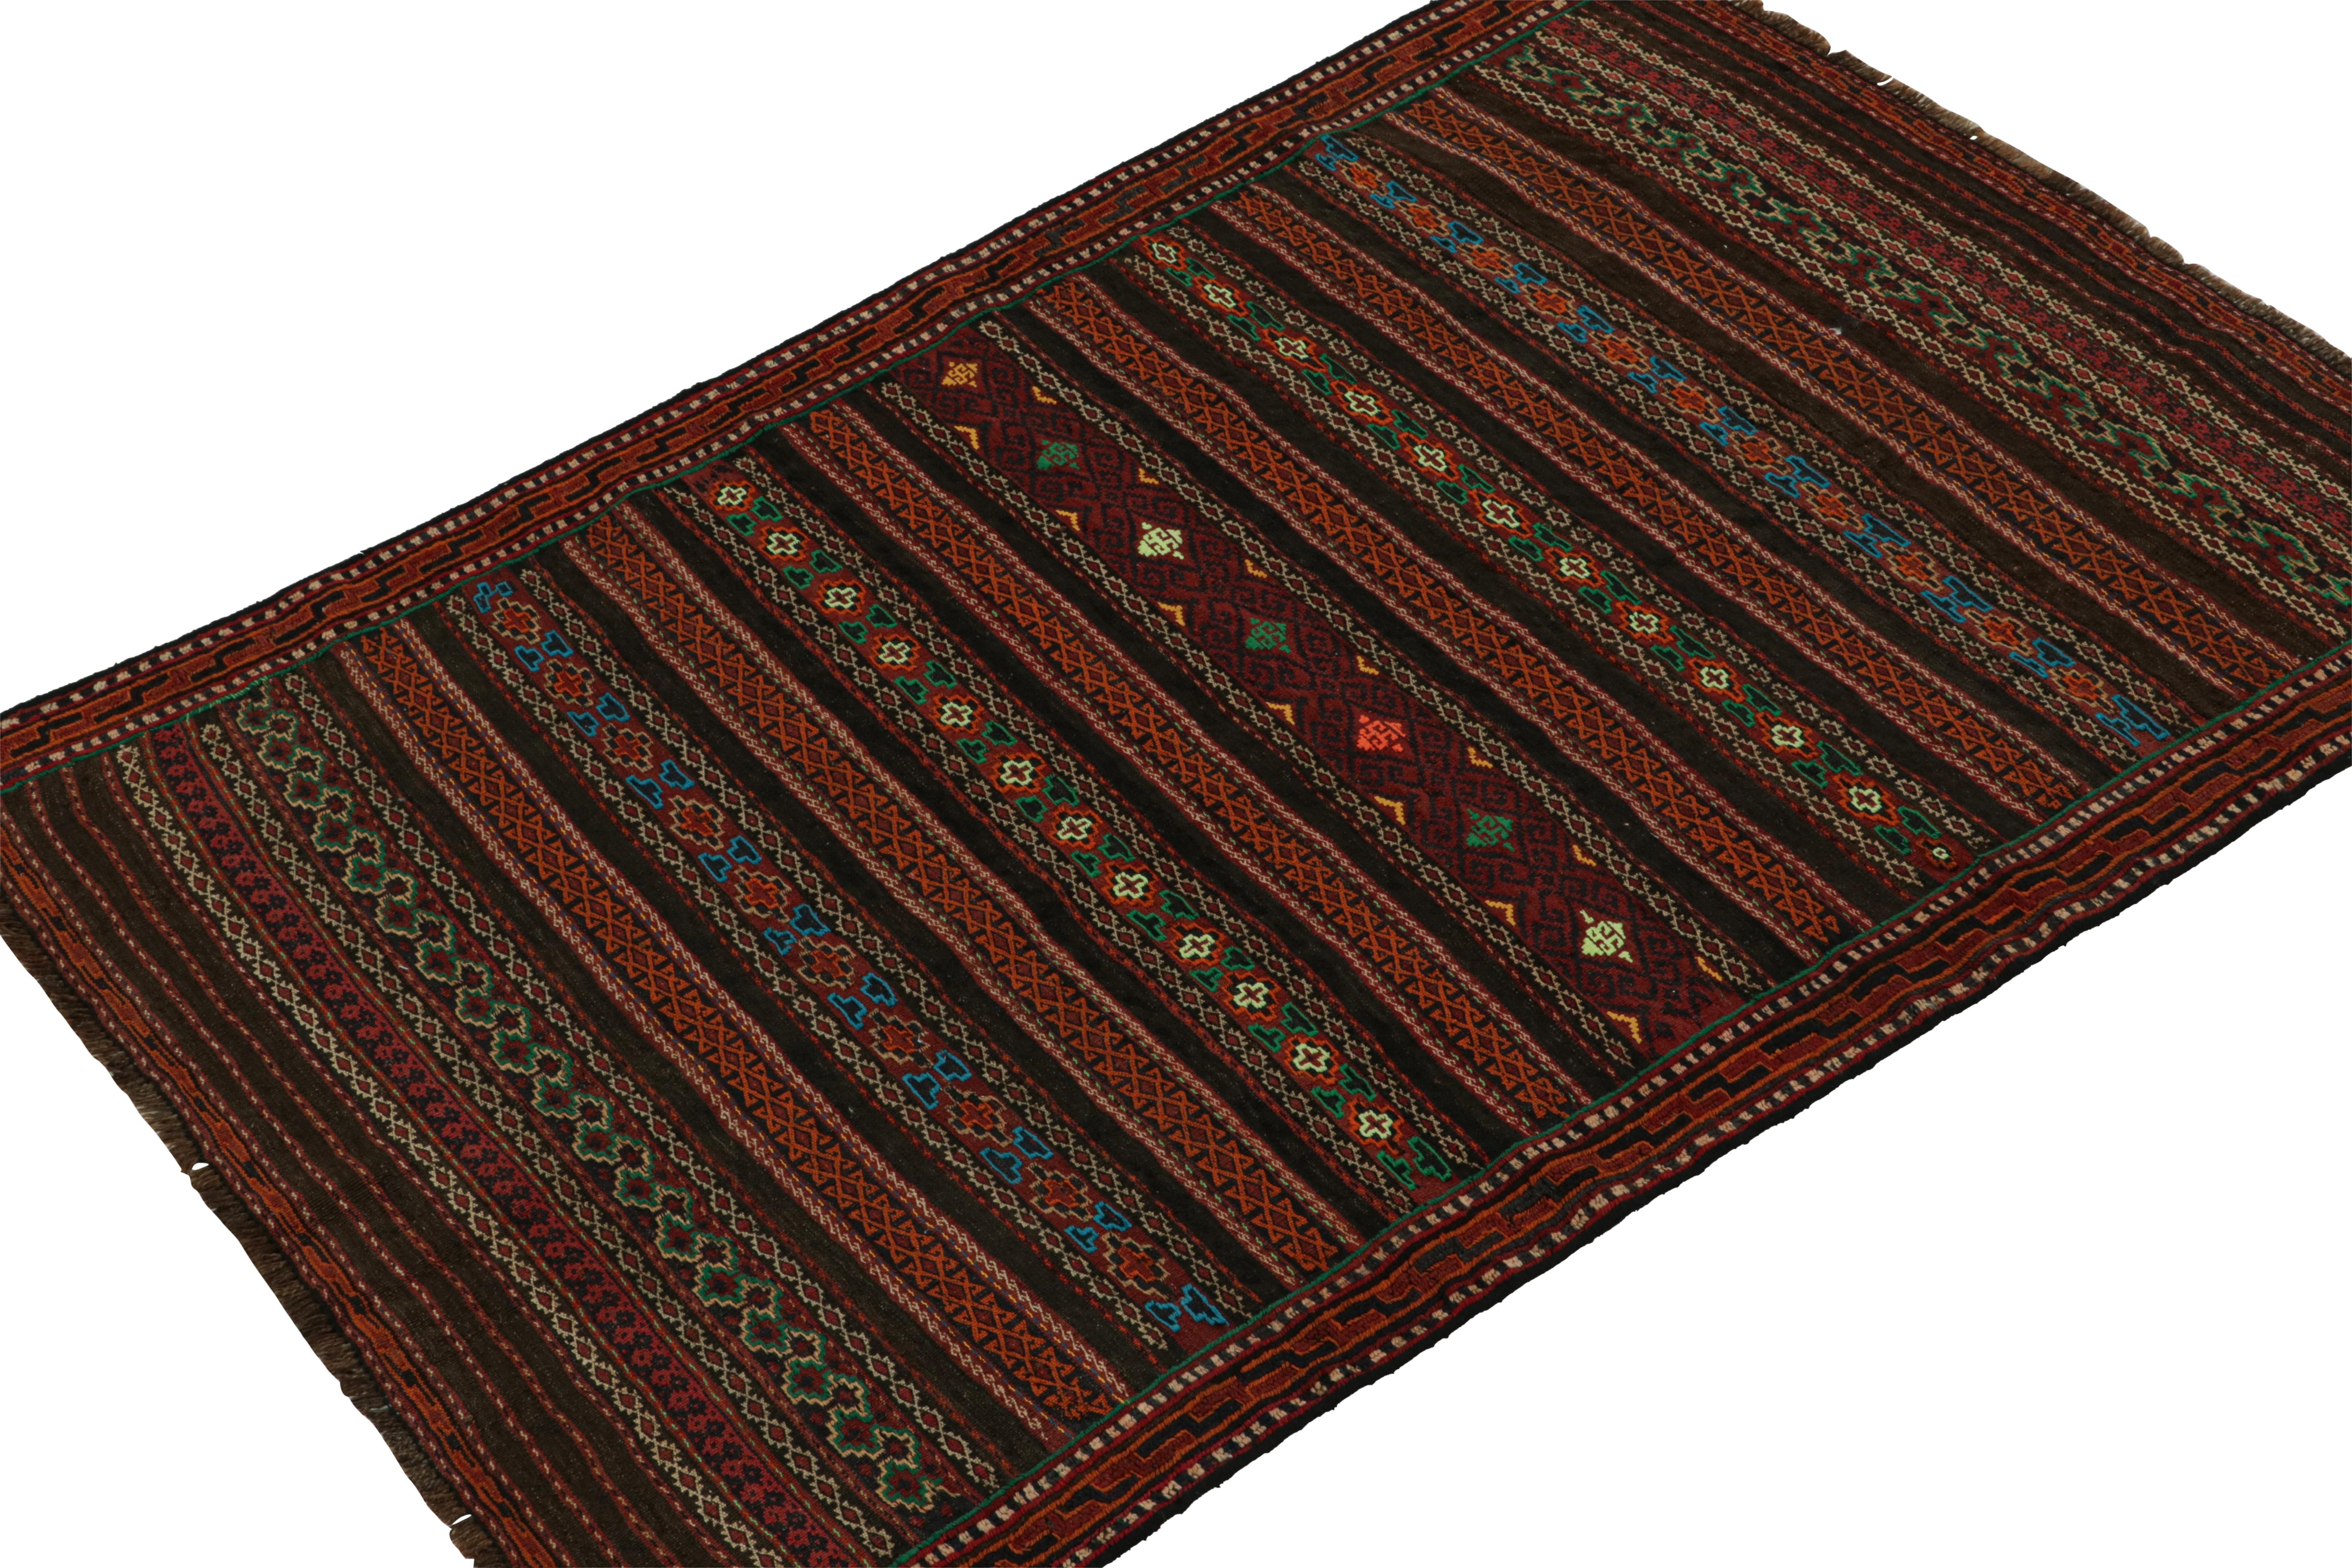 Handwoven in wool circa 1950-1960, this 4x6 vintage Baluch Kilim  is a new curation from Rug & Kilim’s primitivist flatweaves. 

On the Design:

Specifically believed to be coming from the Leghari clan of the Baluch tribe, this 4x6 flatweave boasts